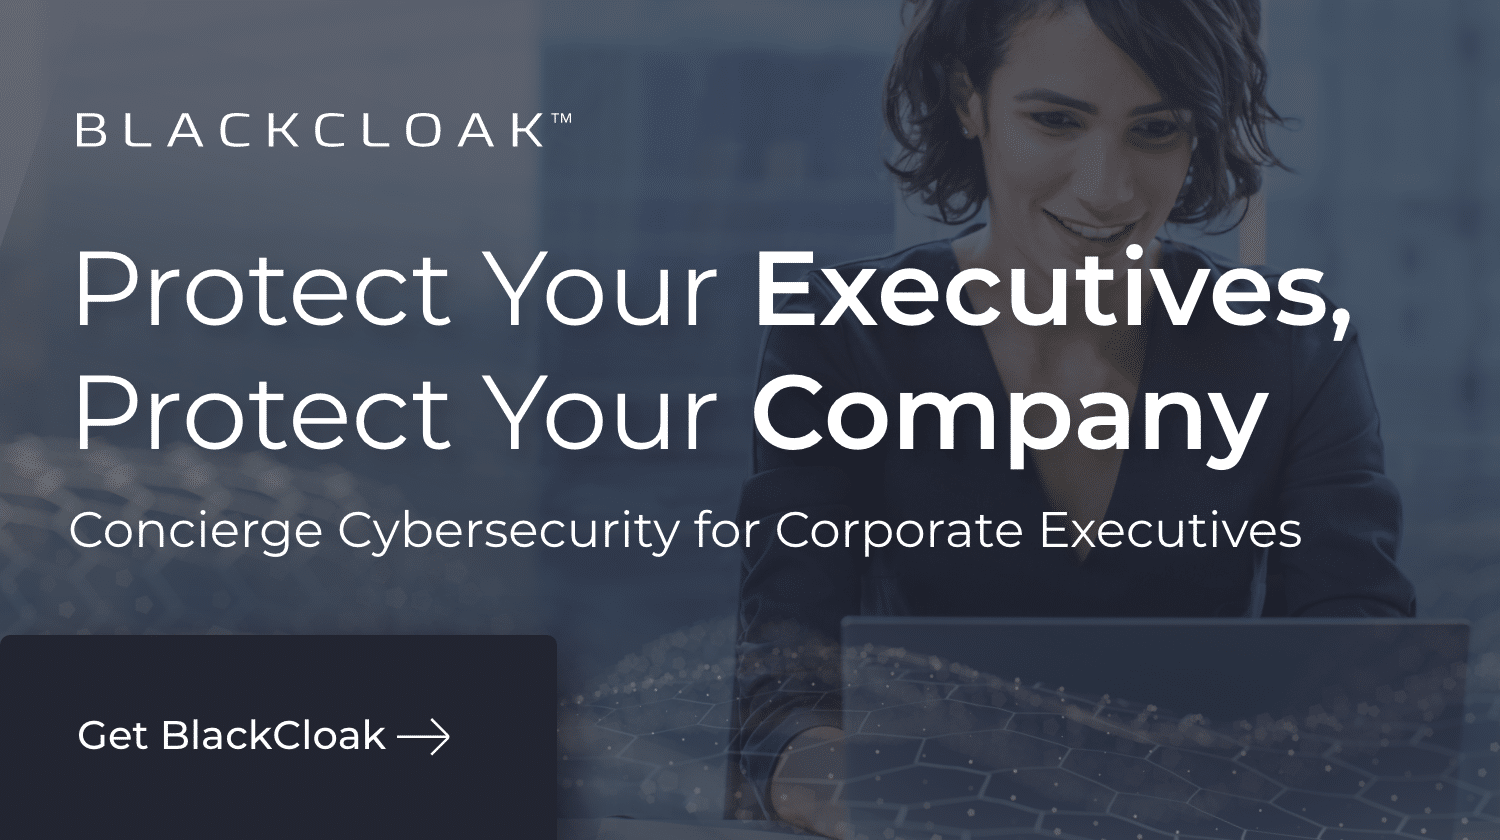 BlackCloak Ads-Protect Your Company